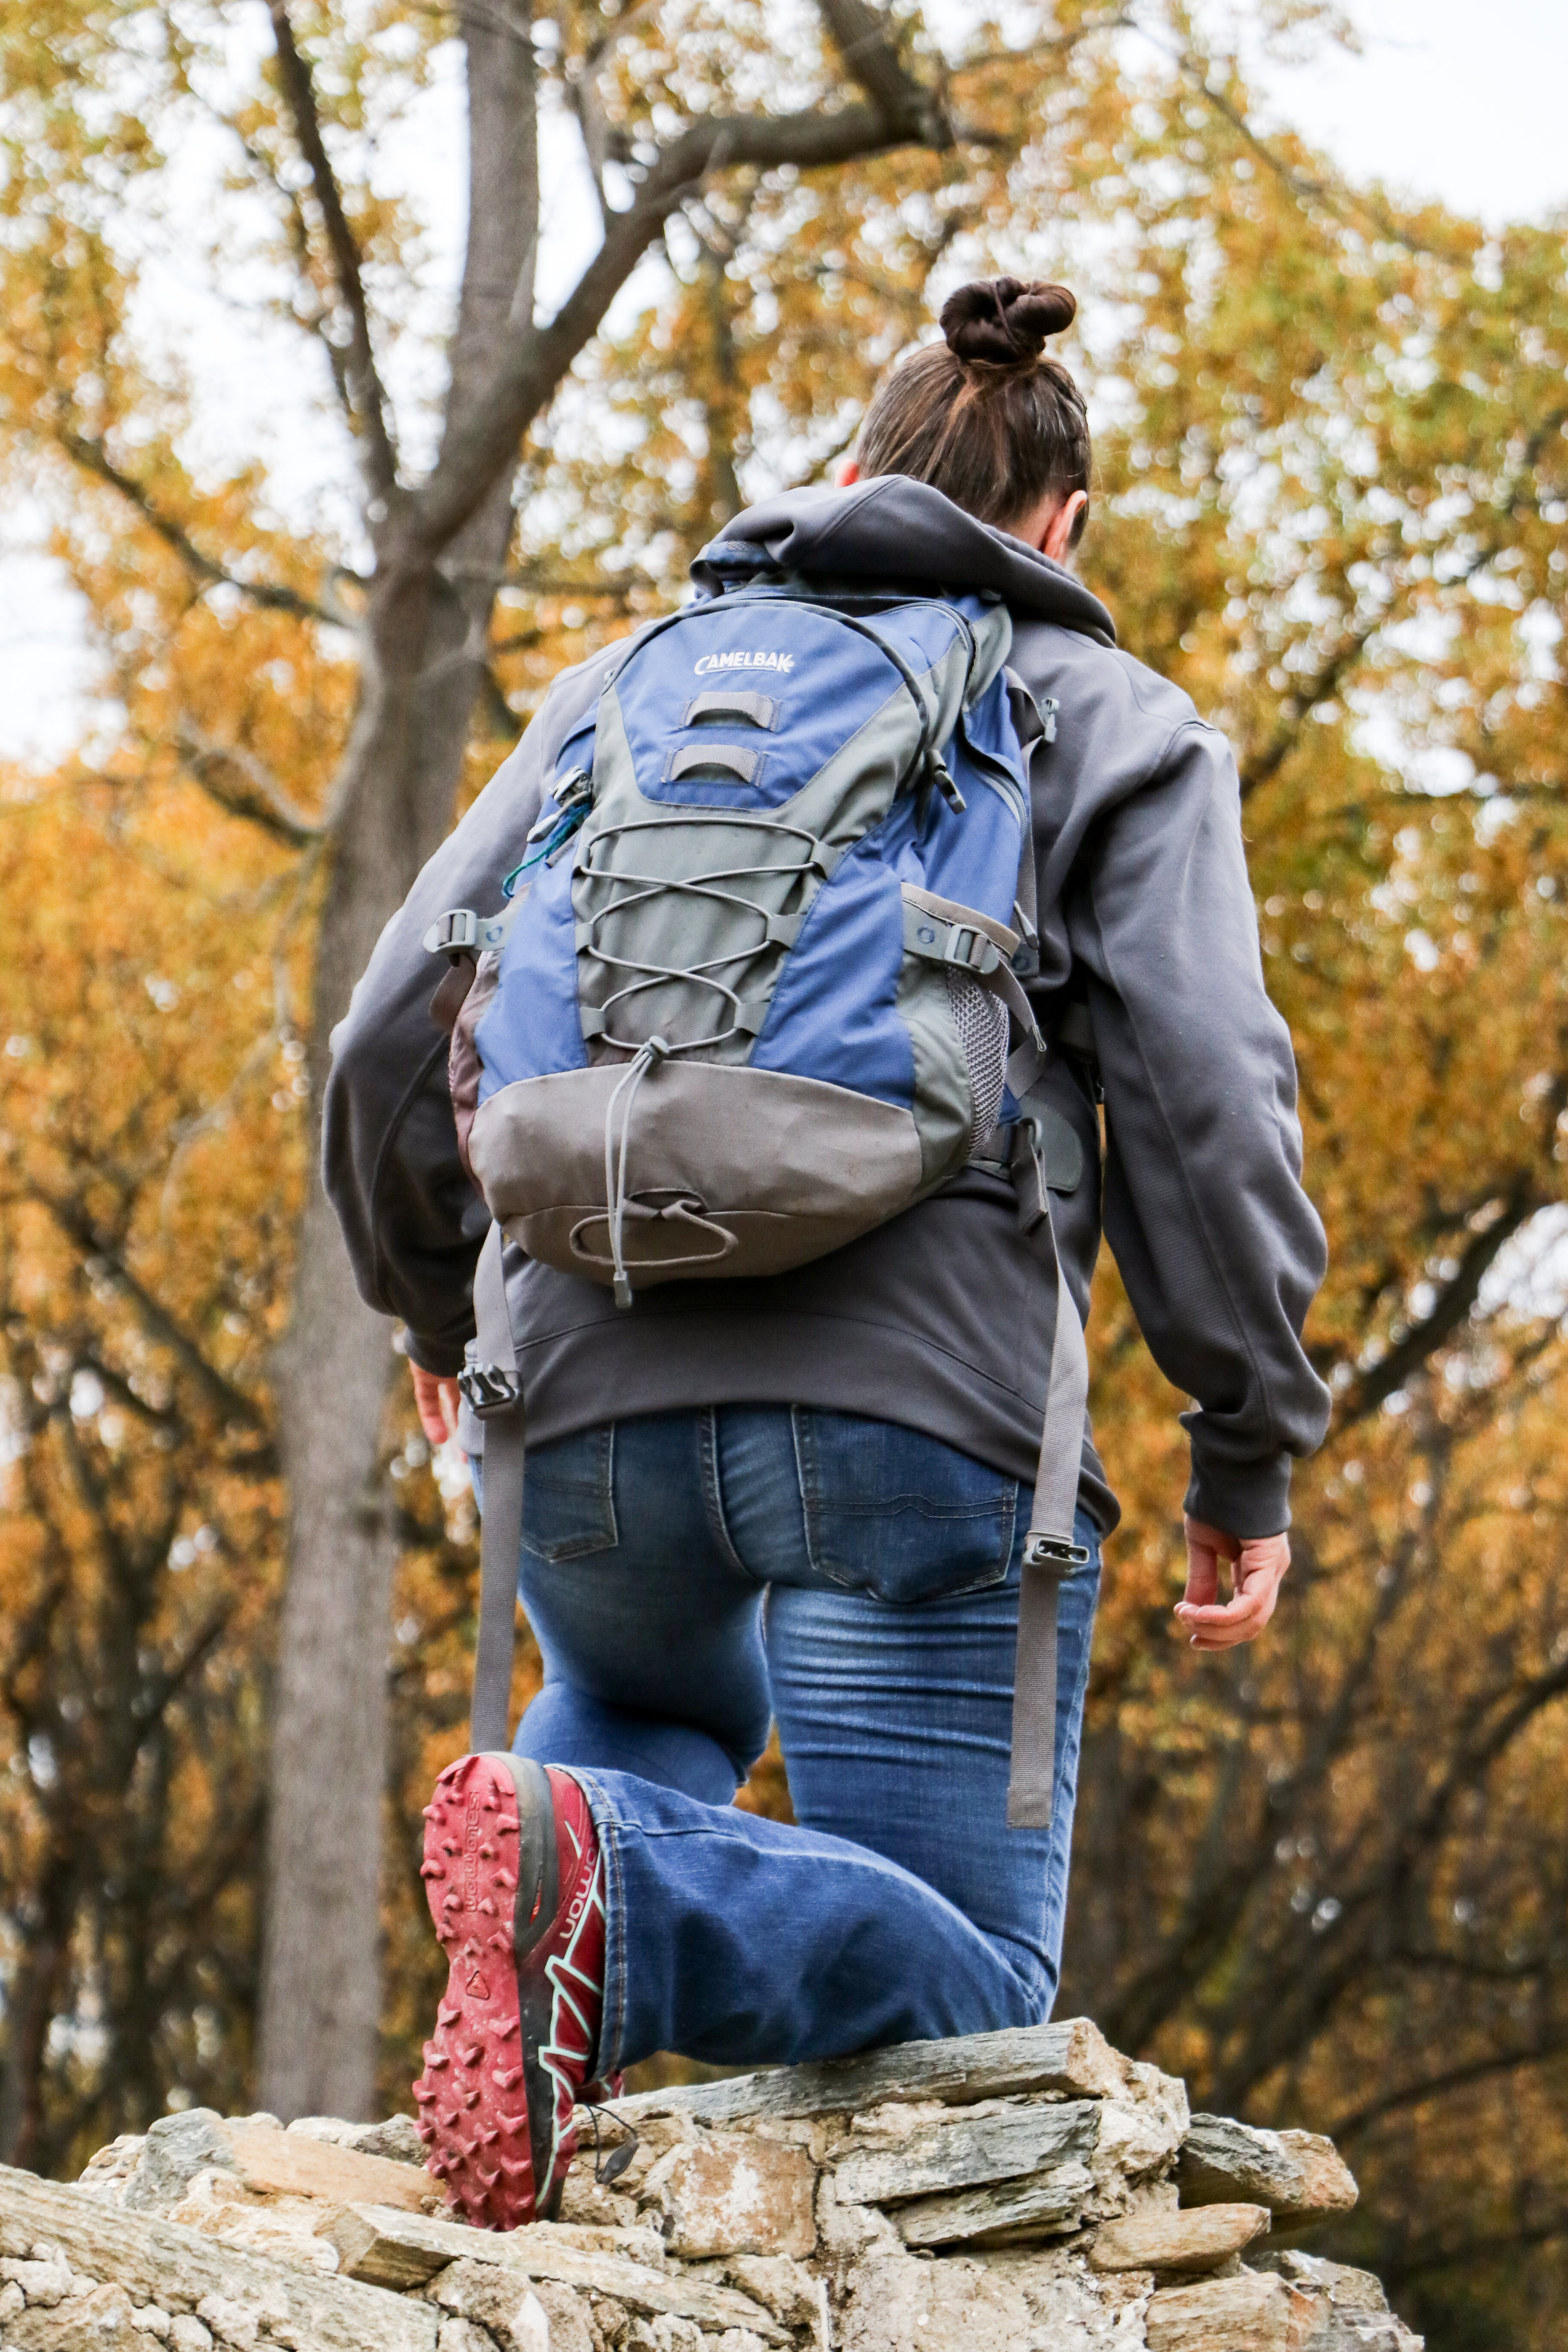 Alt text: a person with their back to the camera steps up onto a gray rock formation. They’re wearing a strappy blue backpack over a gray sweatshirt and blue jeans with hiking boots. The bottom of the